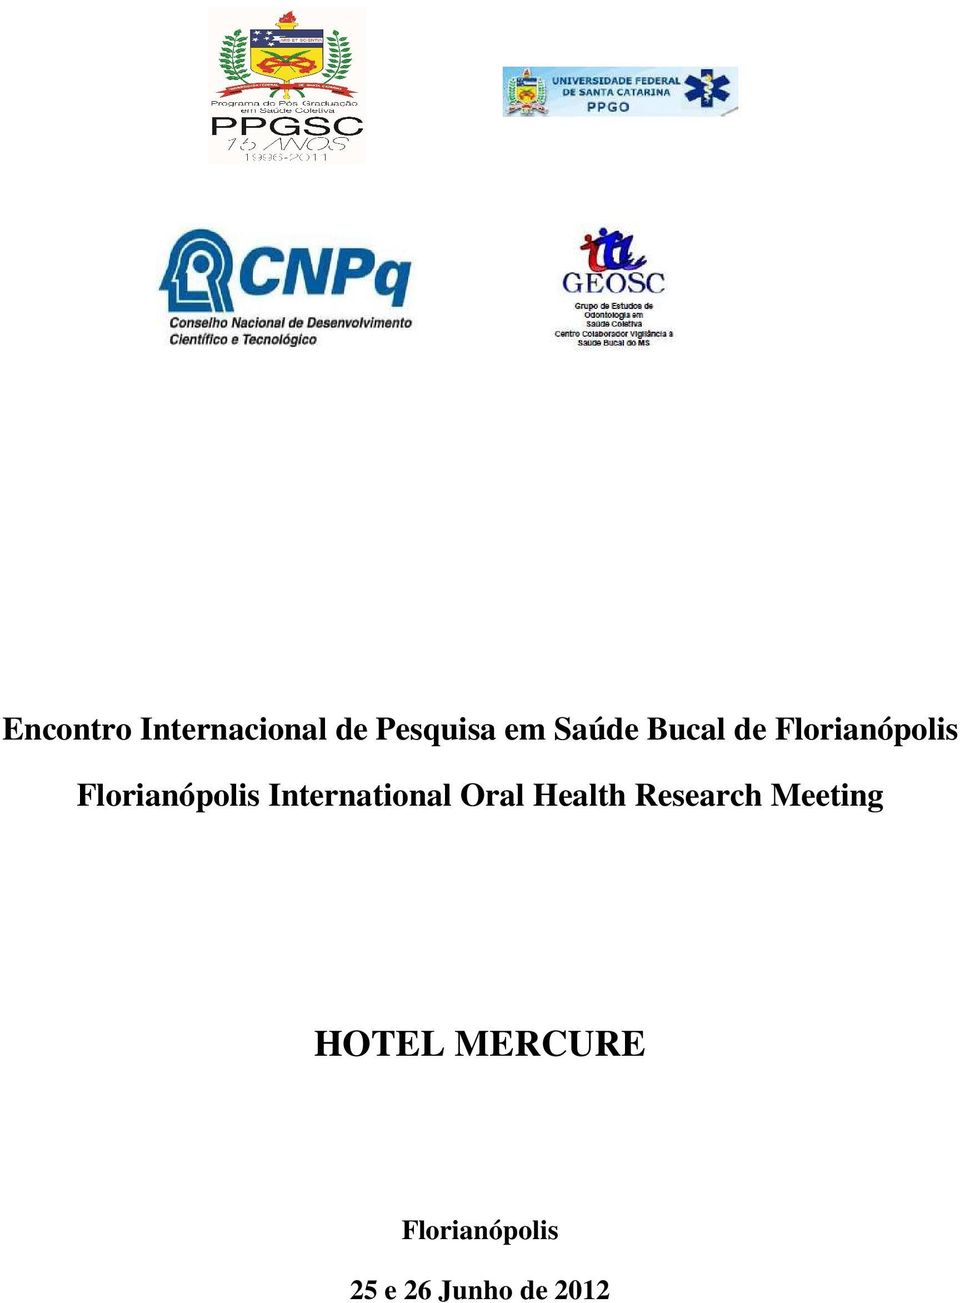 International Oral Health Research Meeting